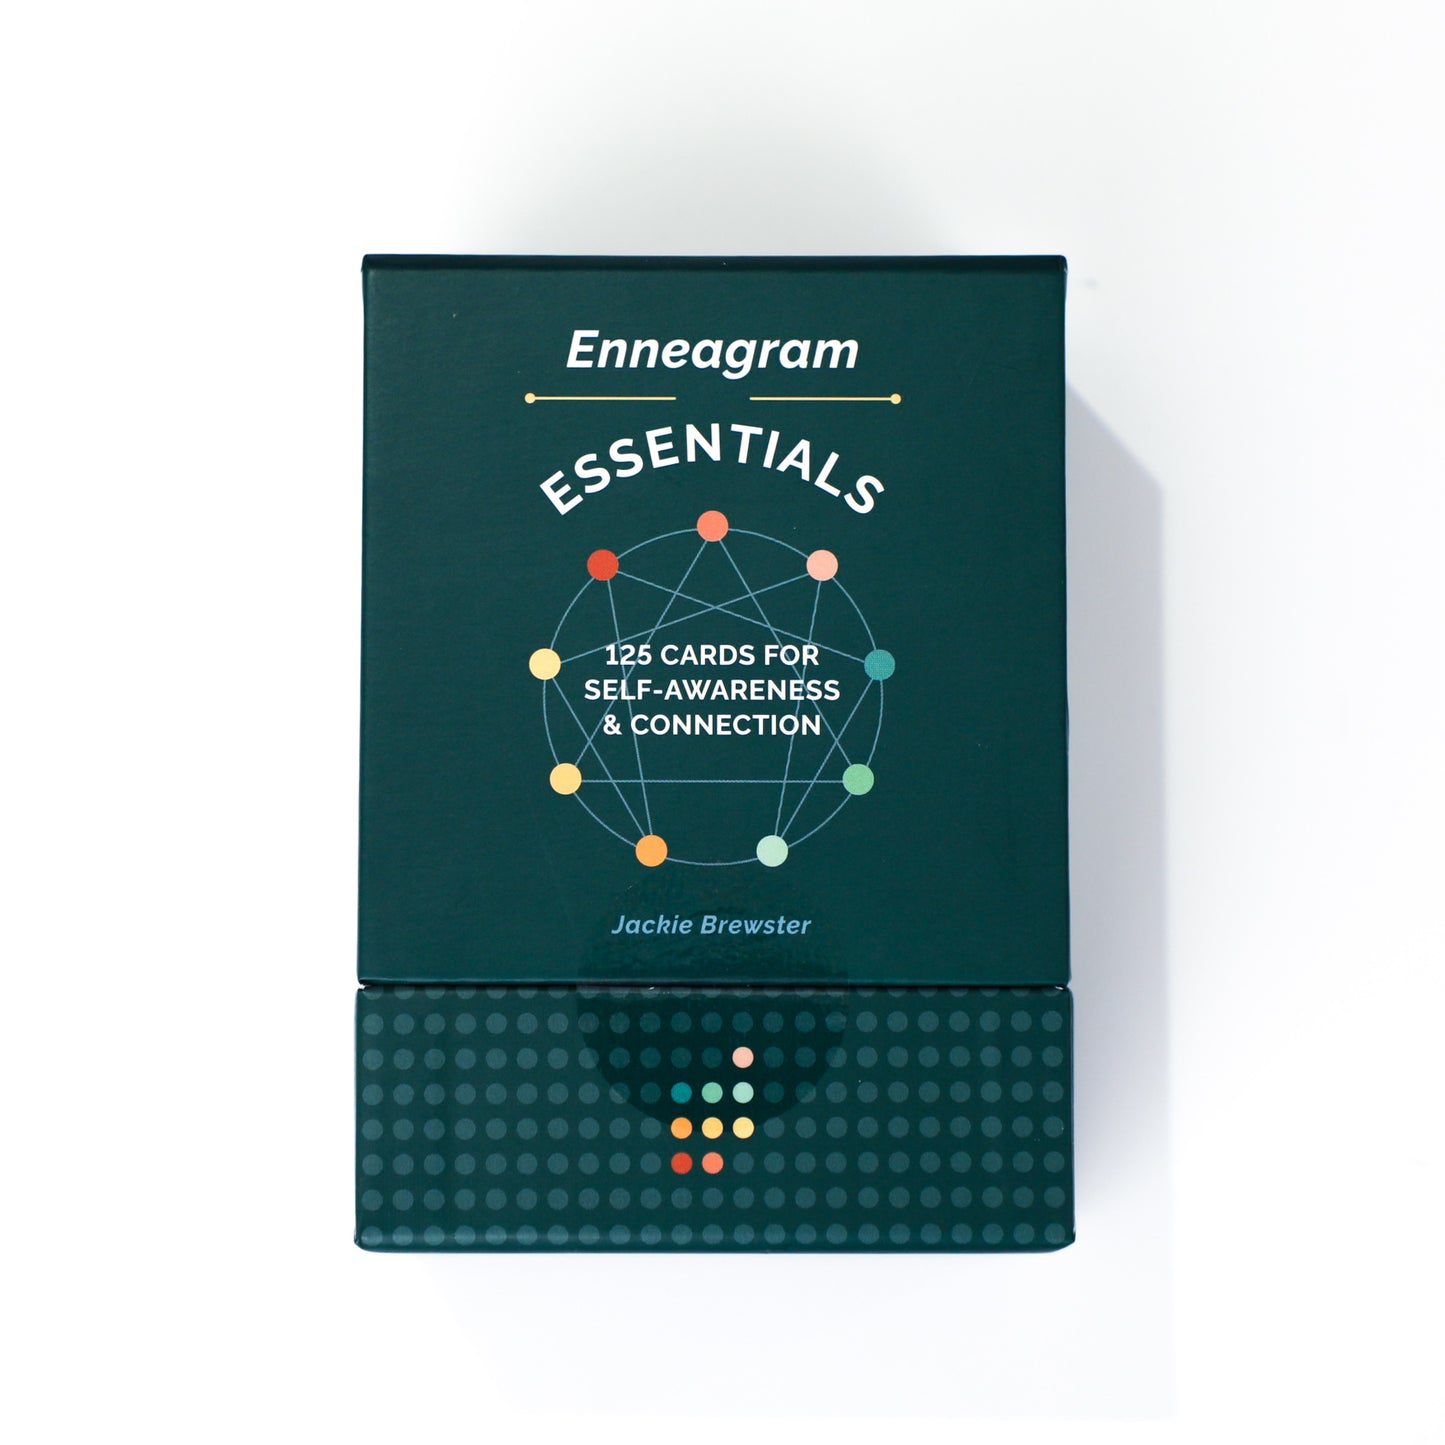 Enneagram Essentials - 125 Cards for Self-Awareness & Connection